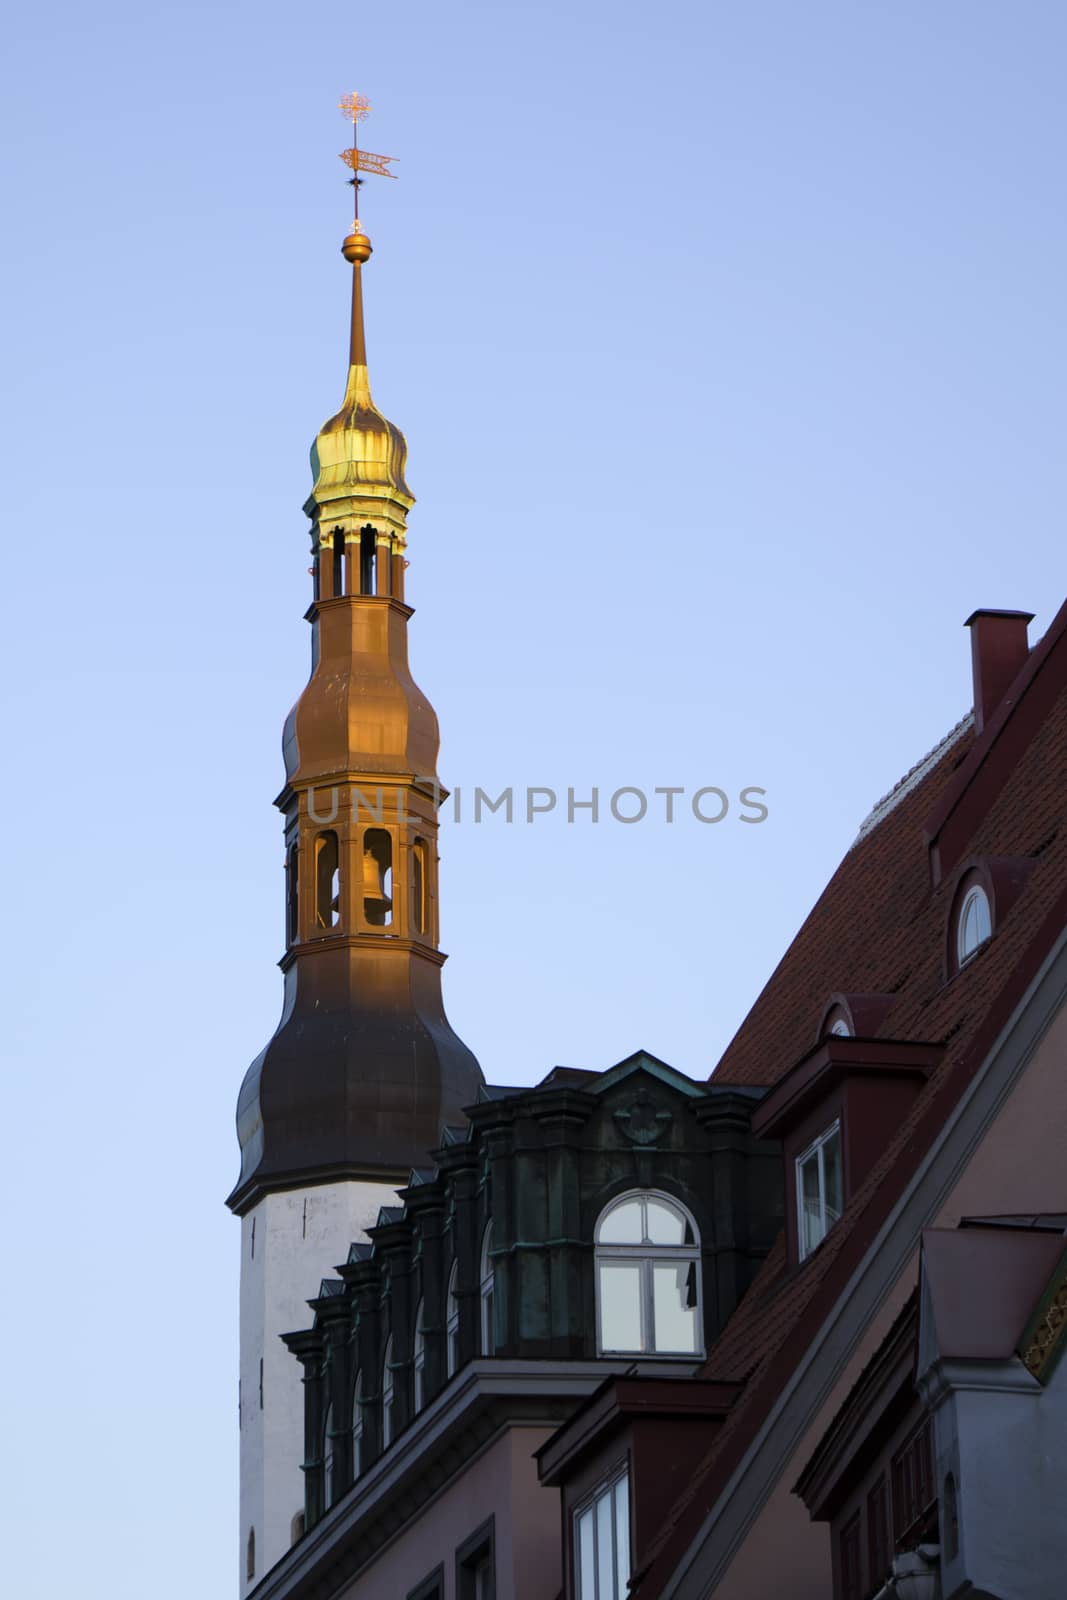 Buildings and architecture exterior view in old town of Tallinn, colorful old style houses roofs. by Taidundua